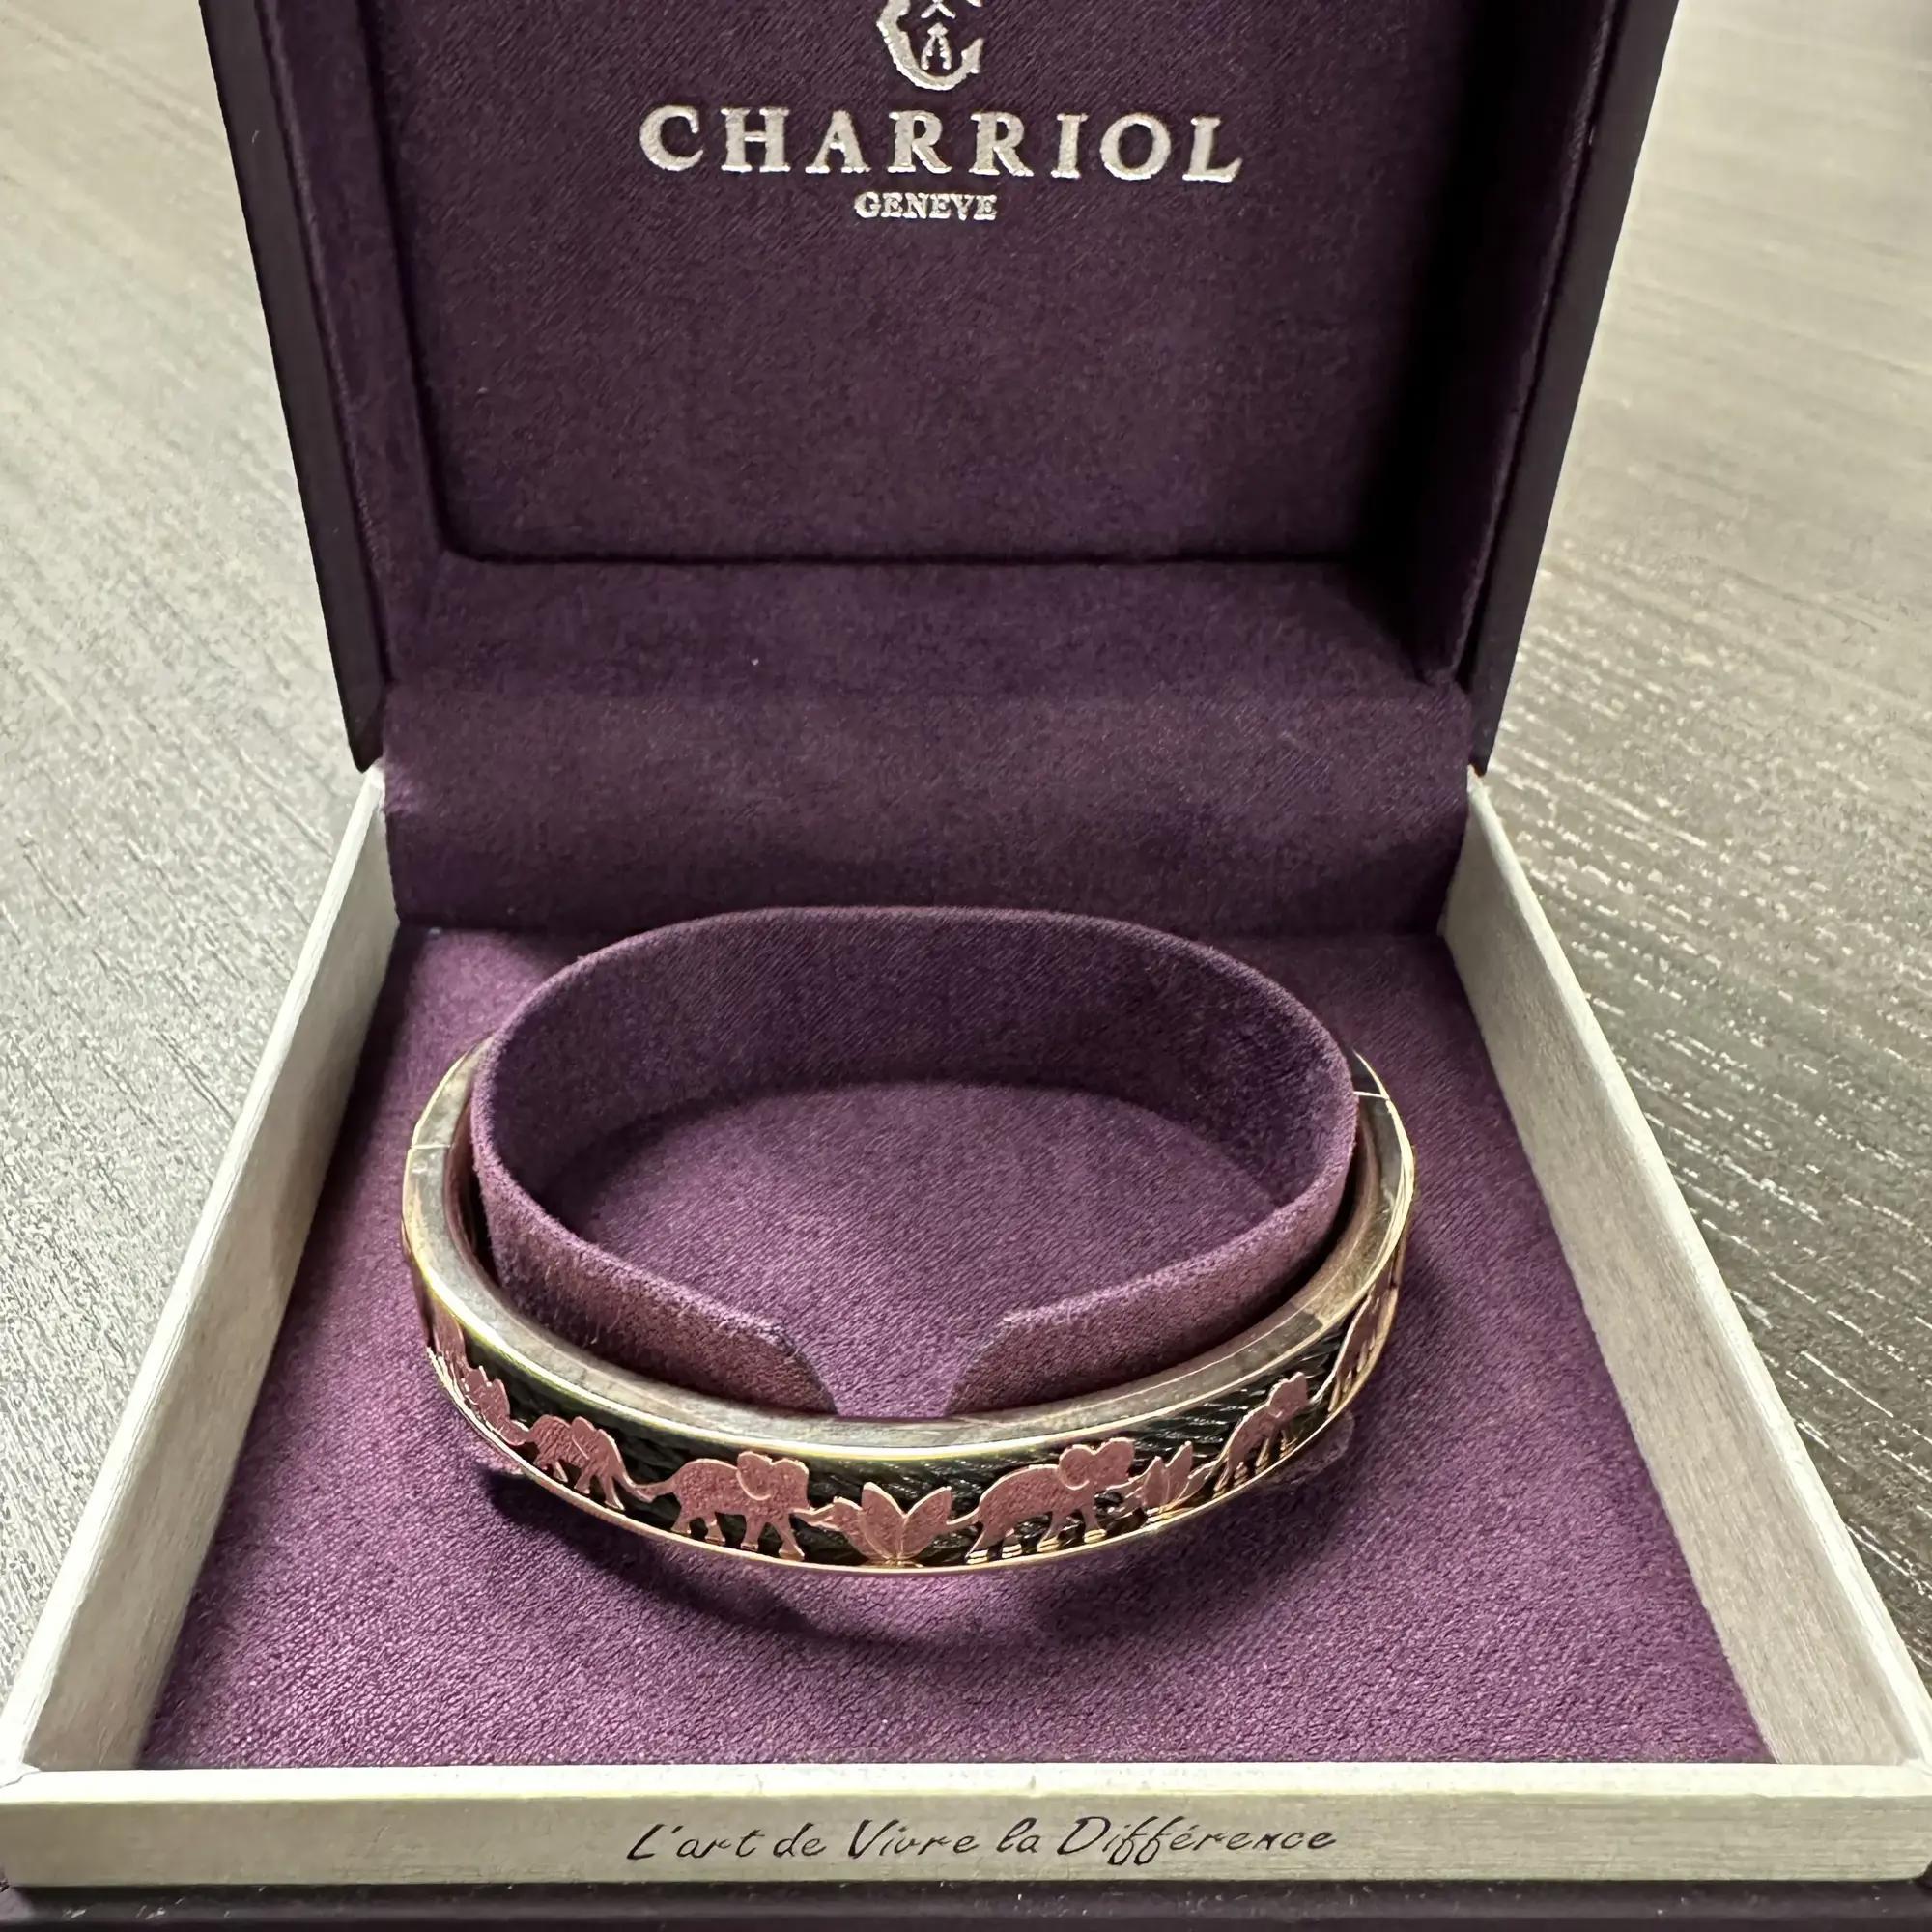 Symbolic and ethical, this beautiful Charriol Forever Animal bangle features elephant motifs throughout the bangle with a black PVD plated steel cable insert. Crafted in rose gold PVD plated stainless steel. Bangle size: Large. Width: 10.15mm. Total